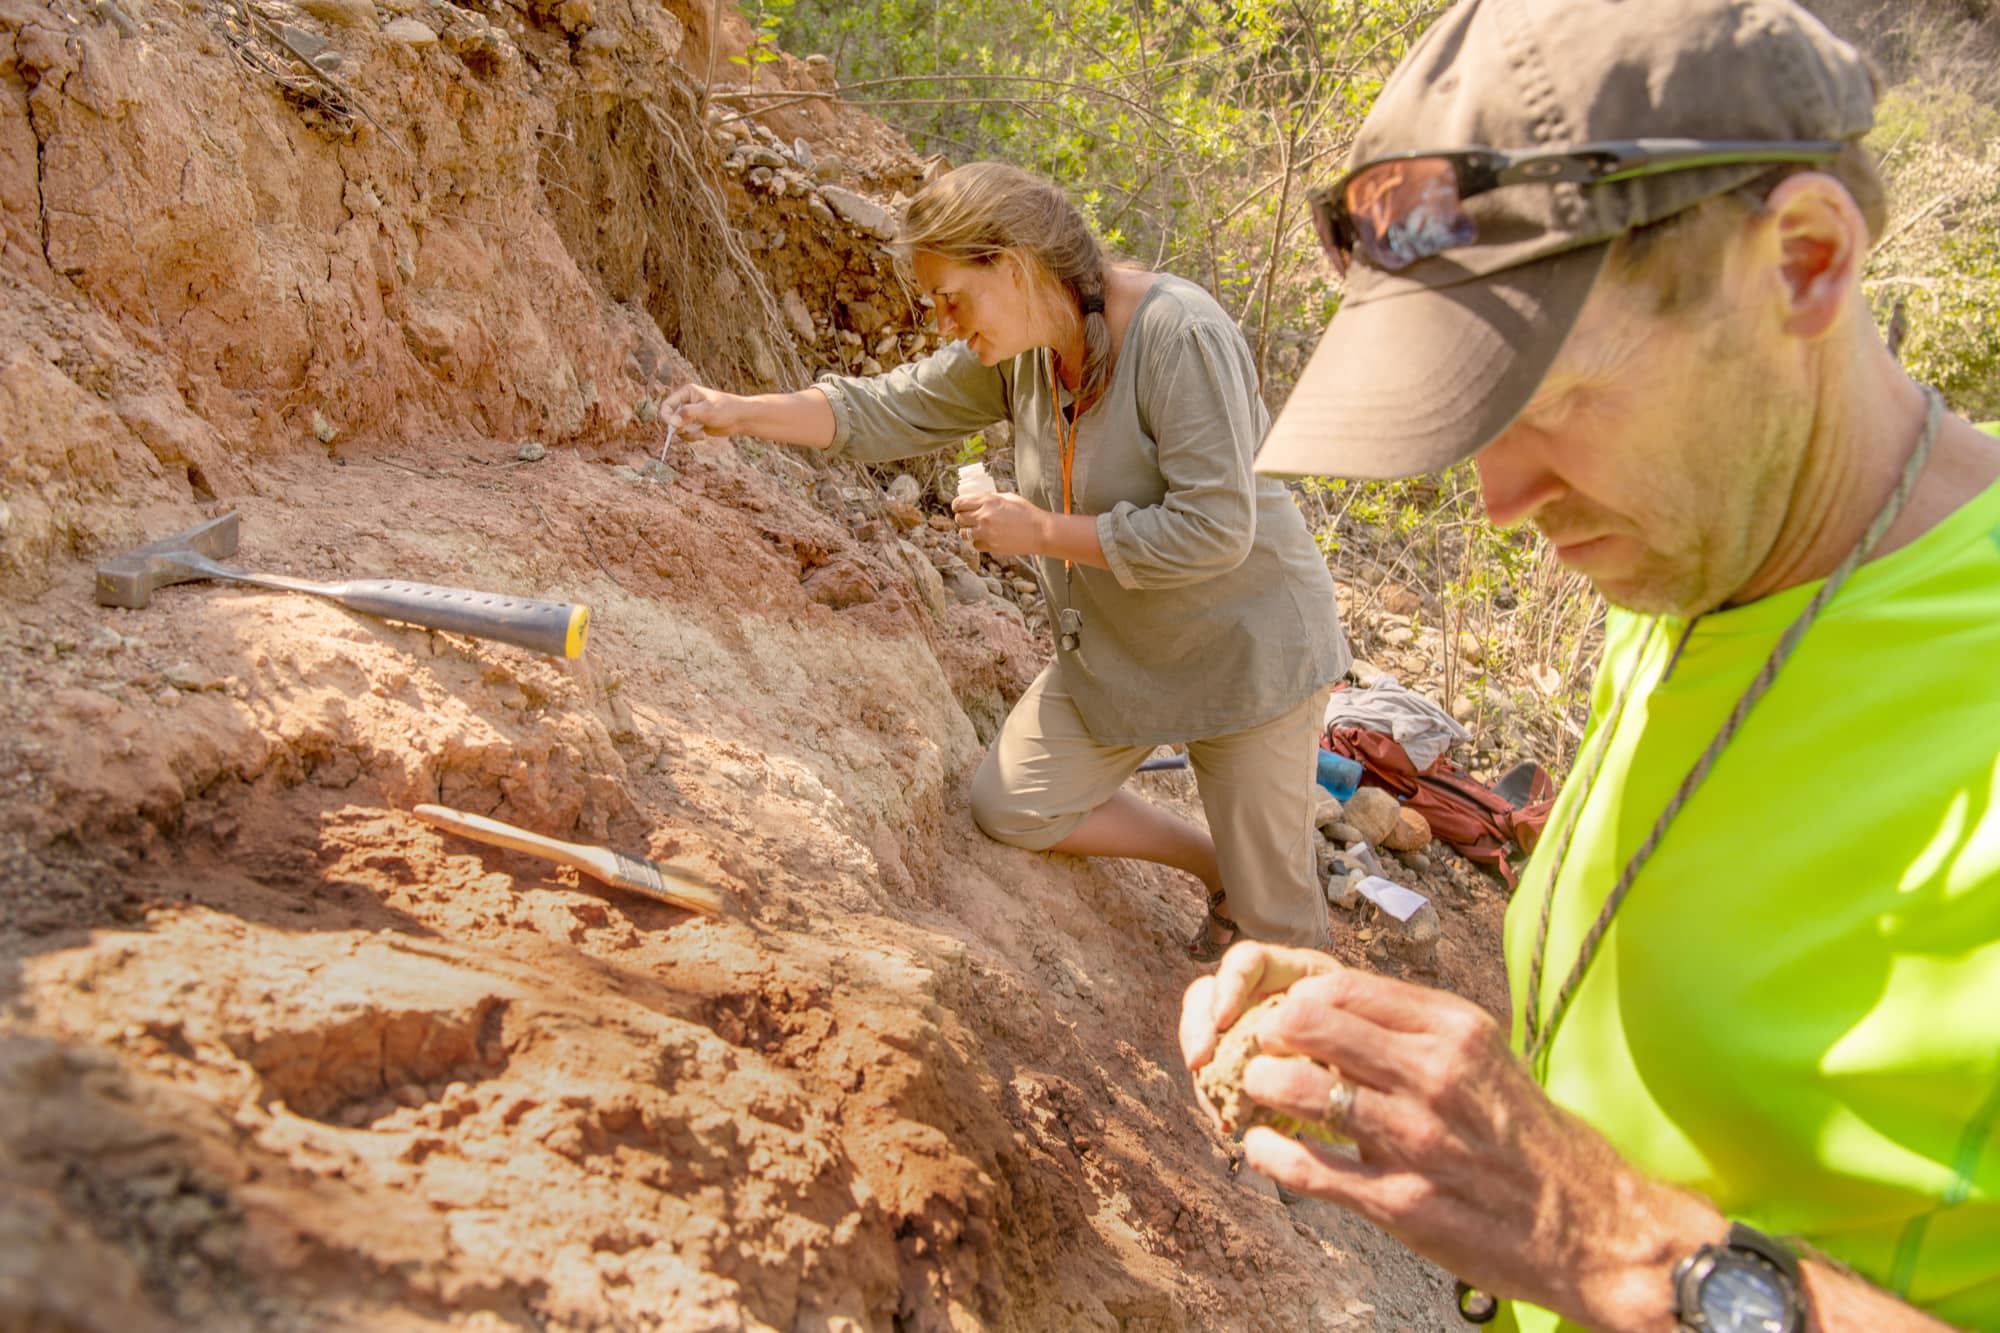 Heritage College professors Nancy Stevens, Ph.D. (left) and Patrick O'Connor, Ph.D., have developed a picture of the ecosystem and evolution of life in the Rukwa Rift Basin in southwestern Tanzania through annual excavations of fossils such as teeth, jawbones, vertebrae and limb elements. The two have described a number of previously-unknown species of dinosaurs and other animals.